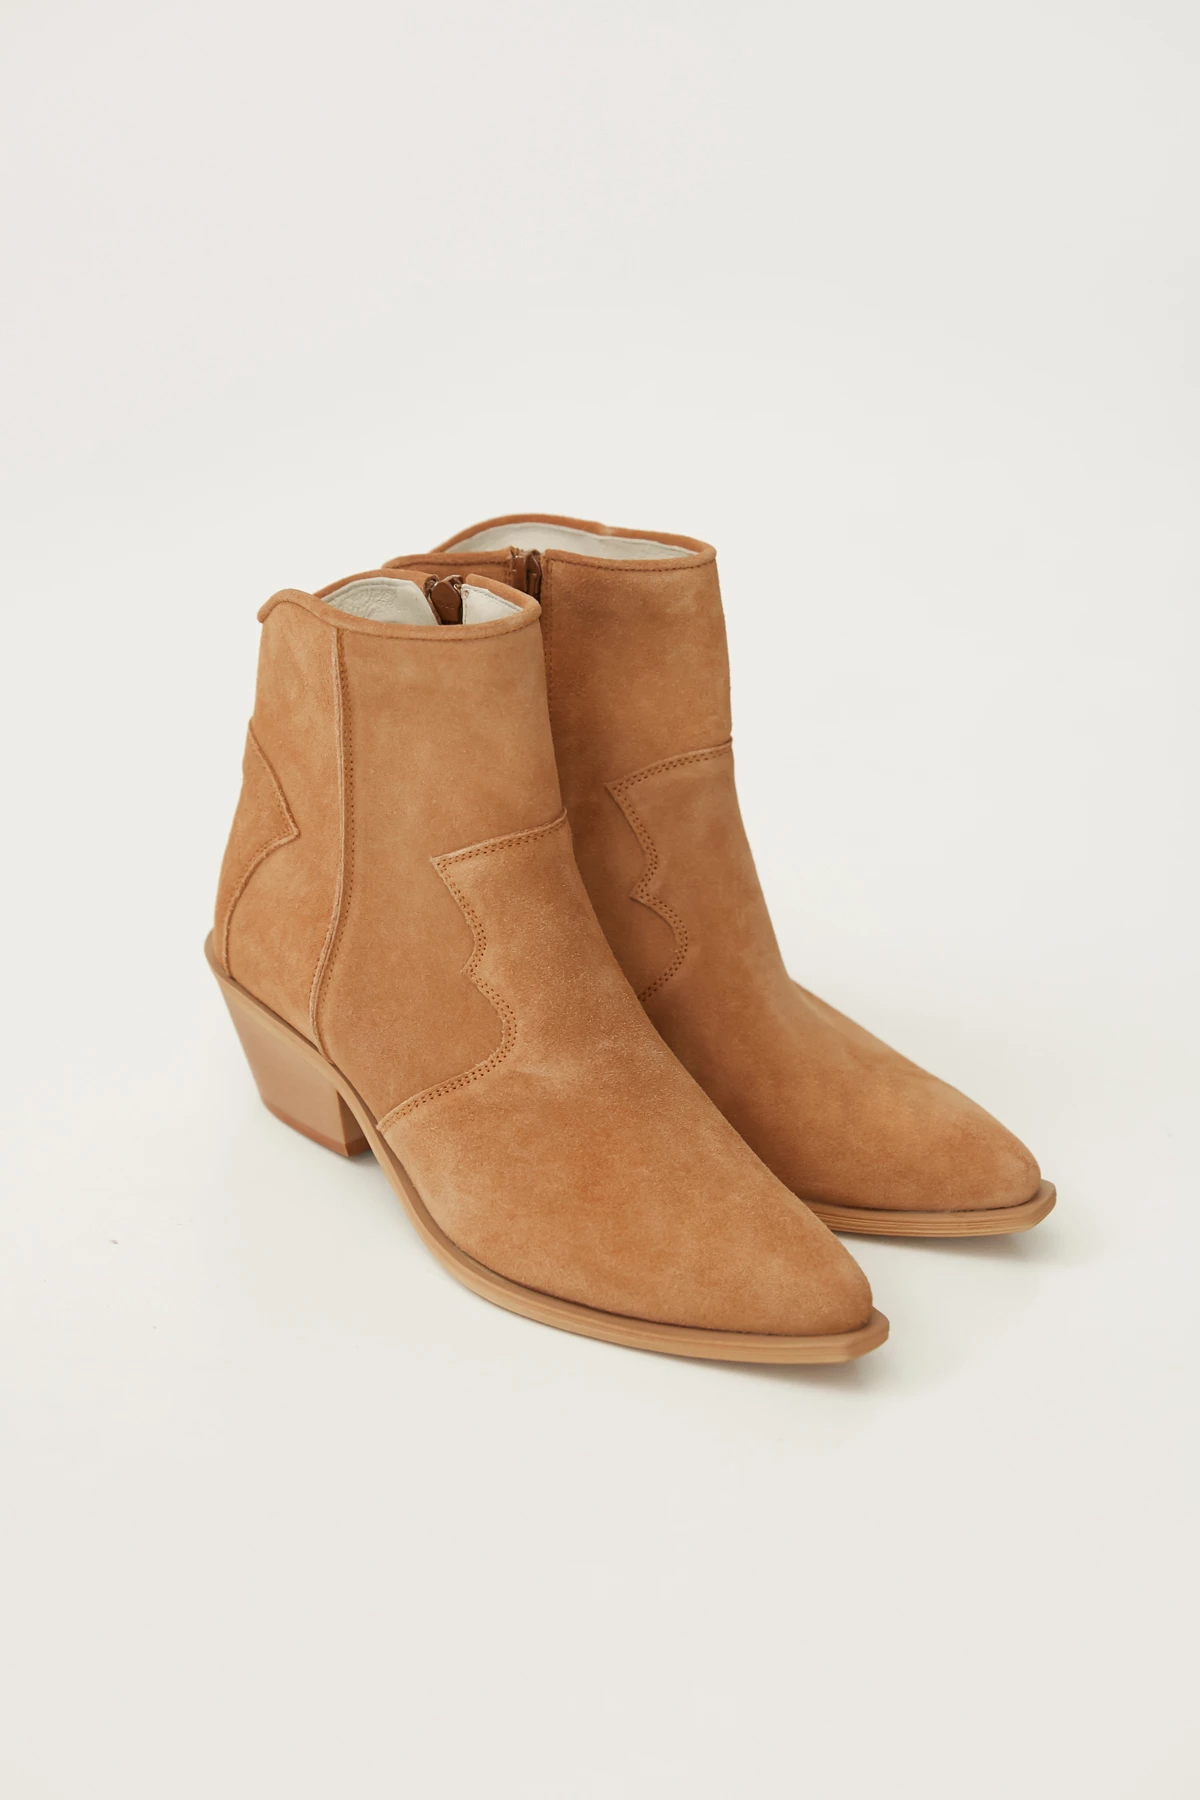 Suede camel сowboy boots, photo 2